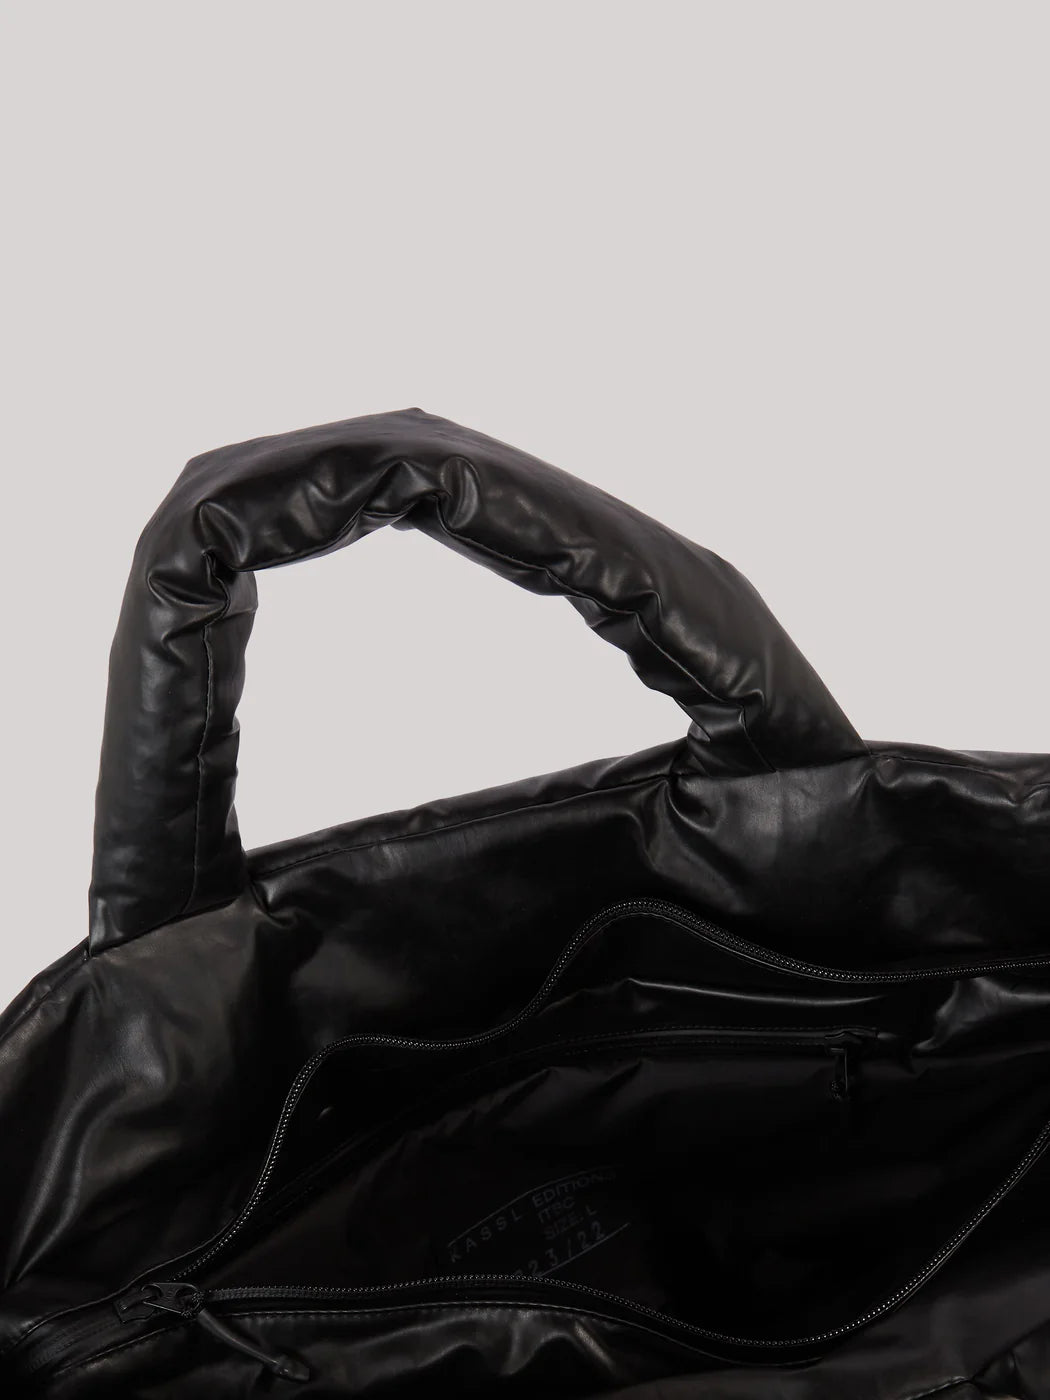 Oversized bag by Kassl Editions in black